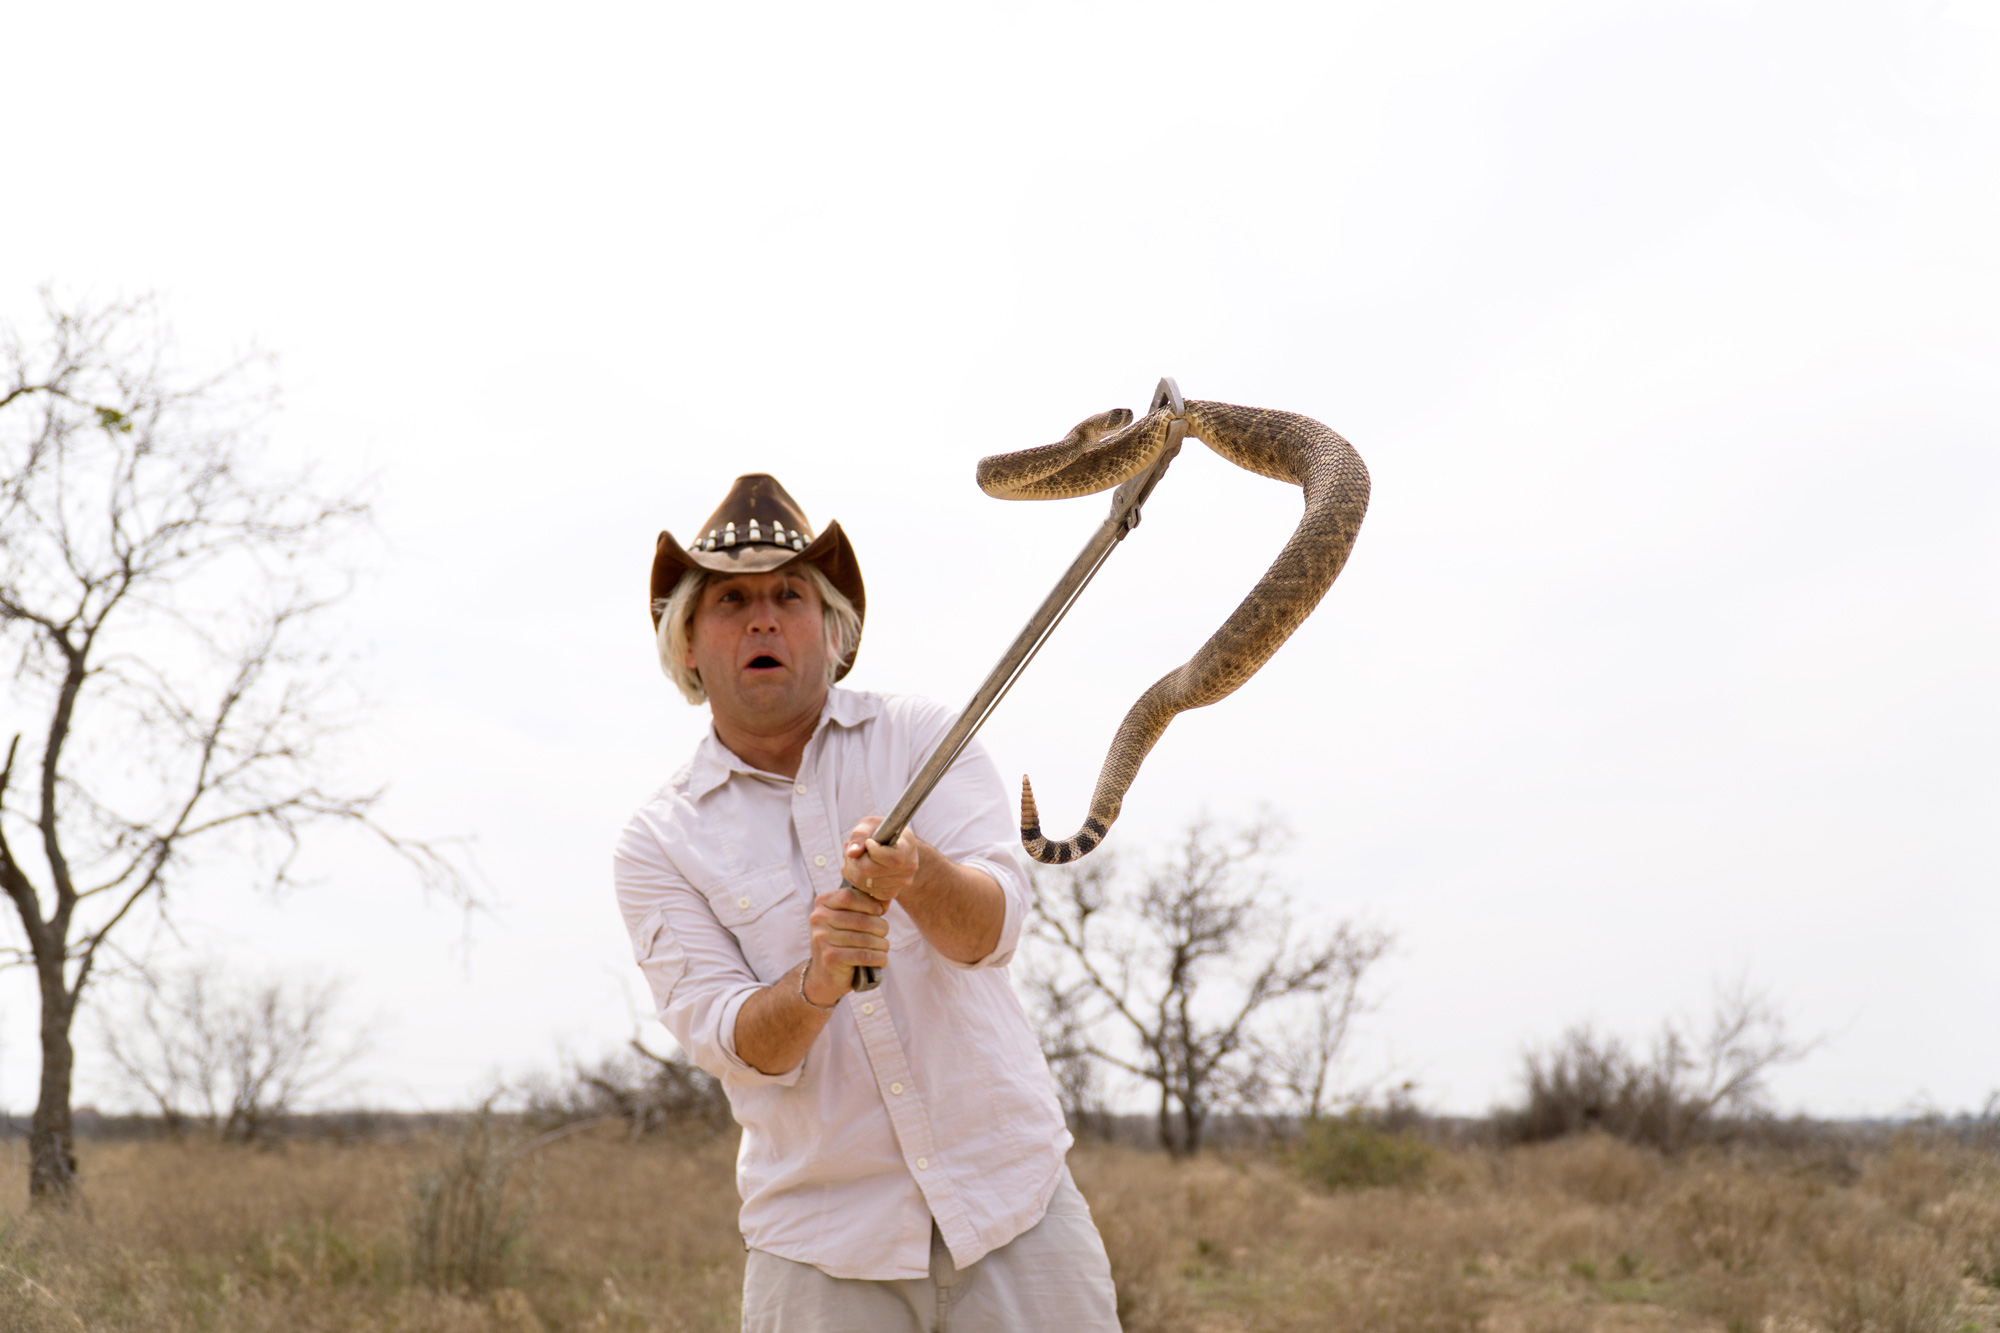 Chet with a rattlesnake